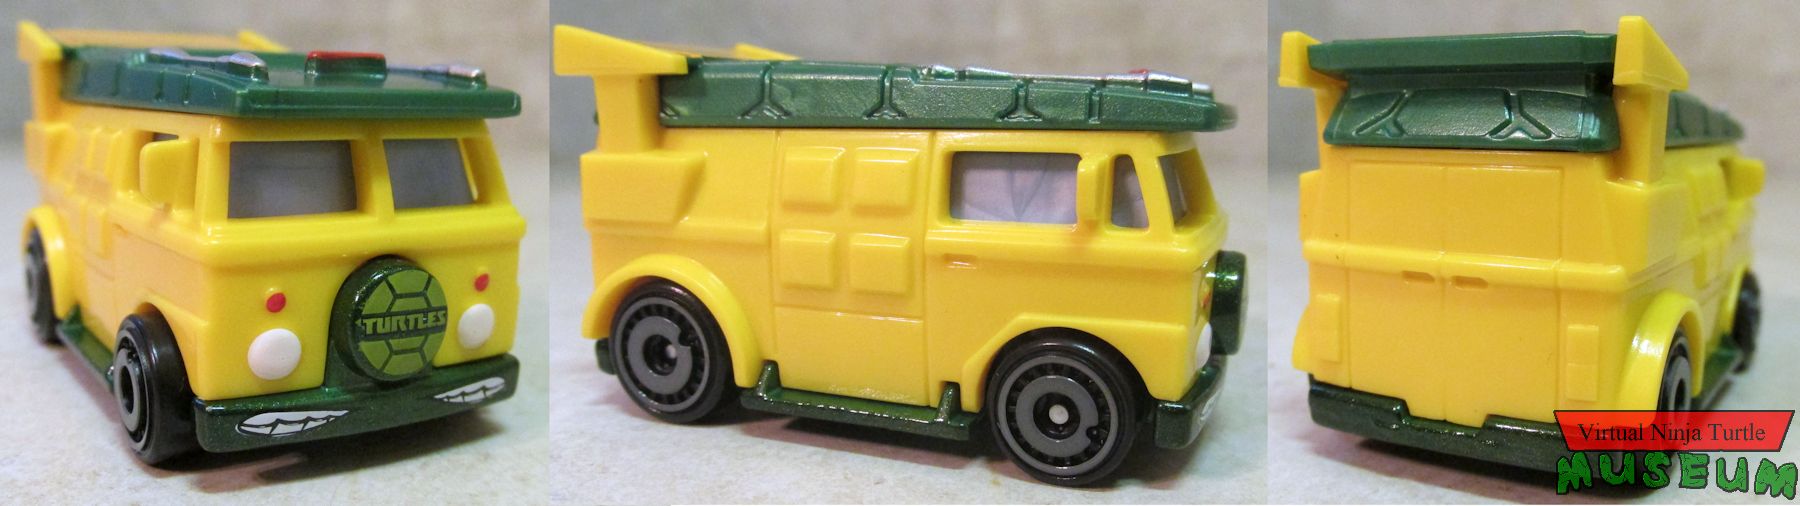 Hot Wheels Party Wagon front, side and back